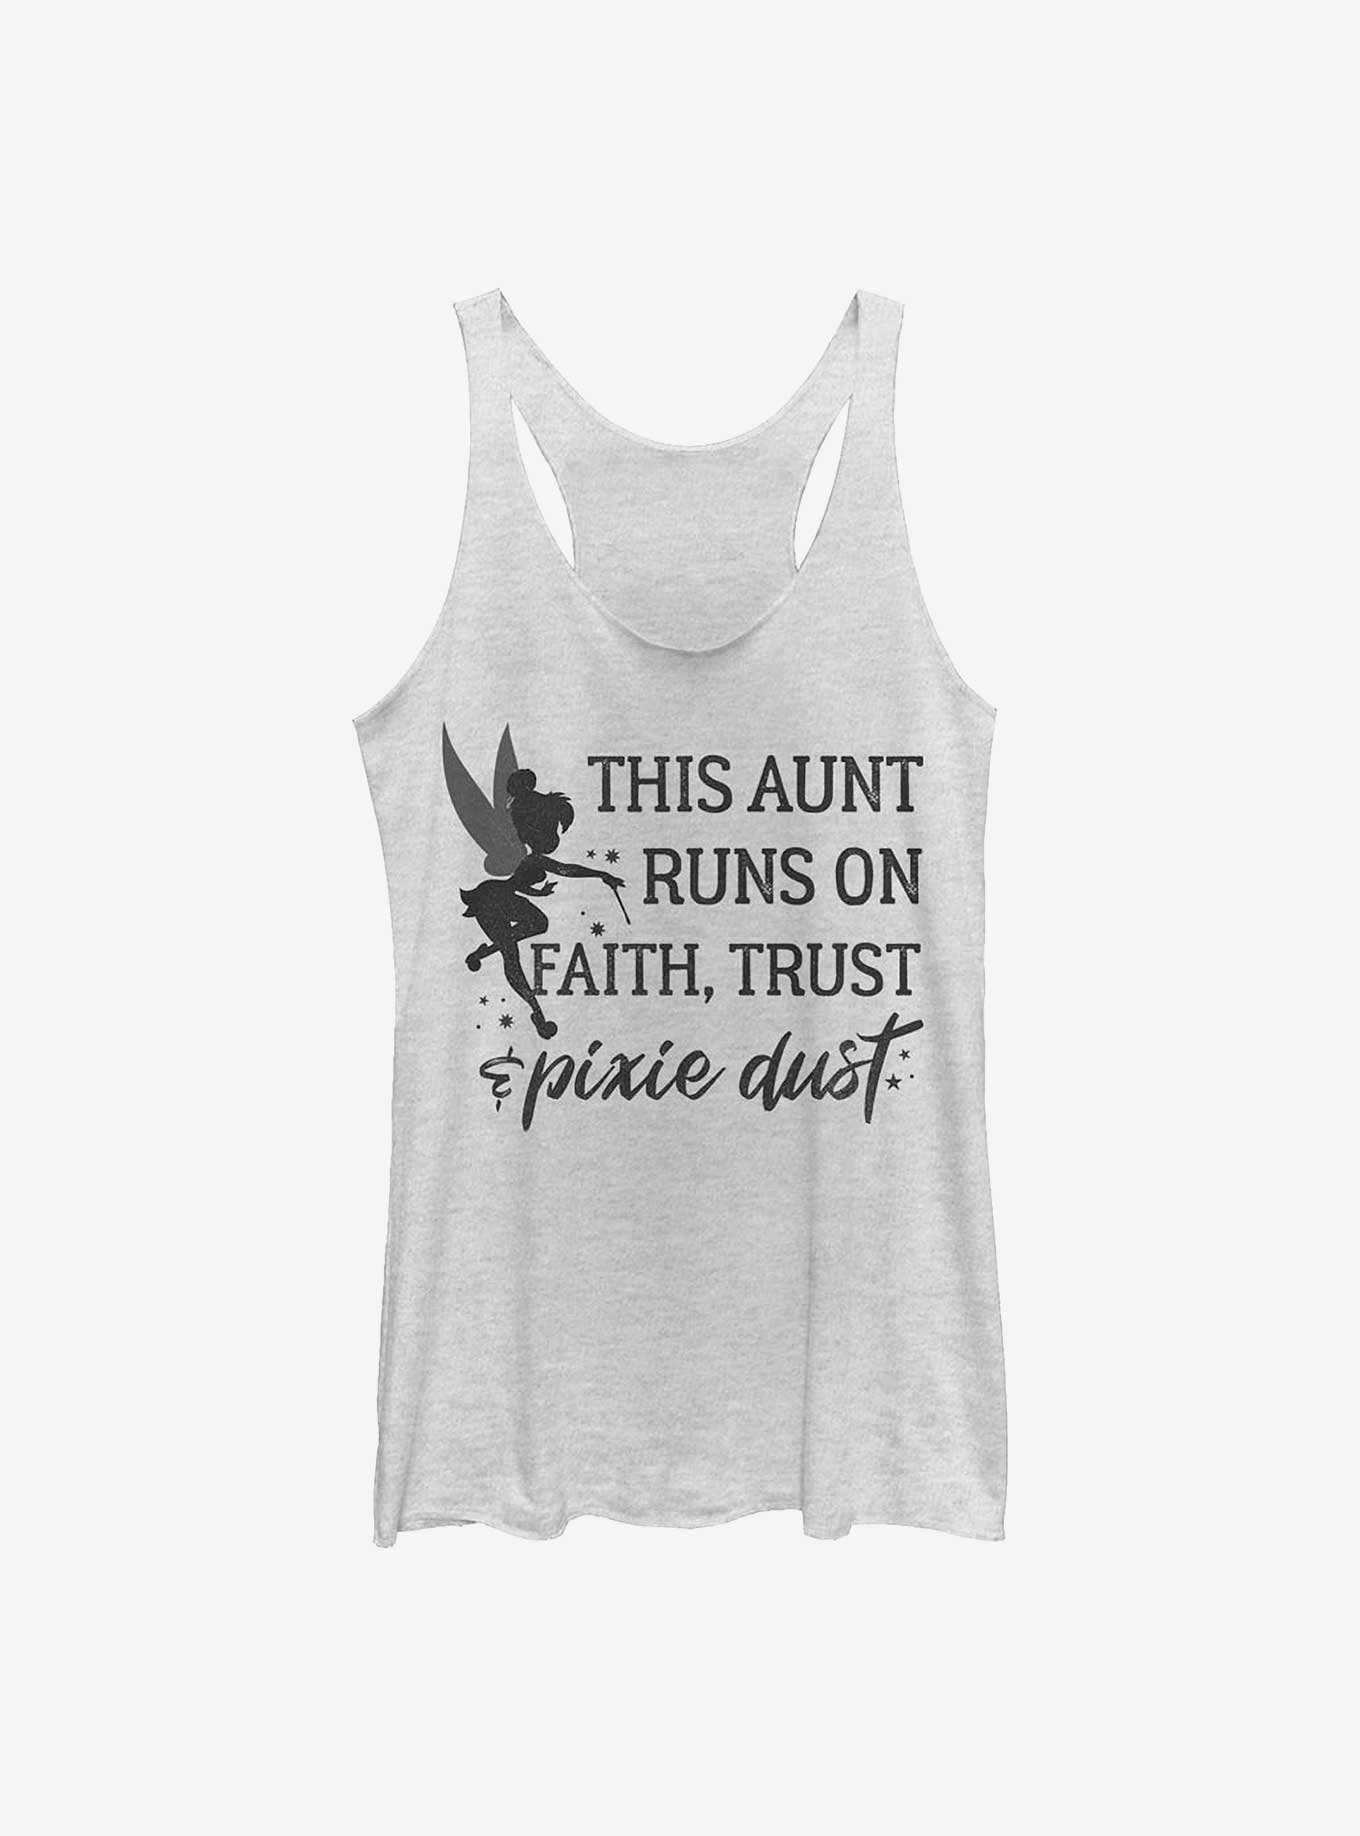 Disney Tinker Bell This Aunt Runs On Faith Trust and Pixie Dust Girls Tank, , hi-res